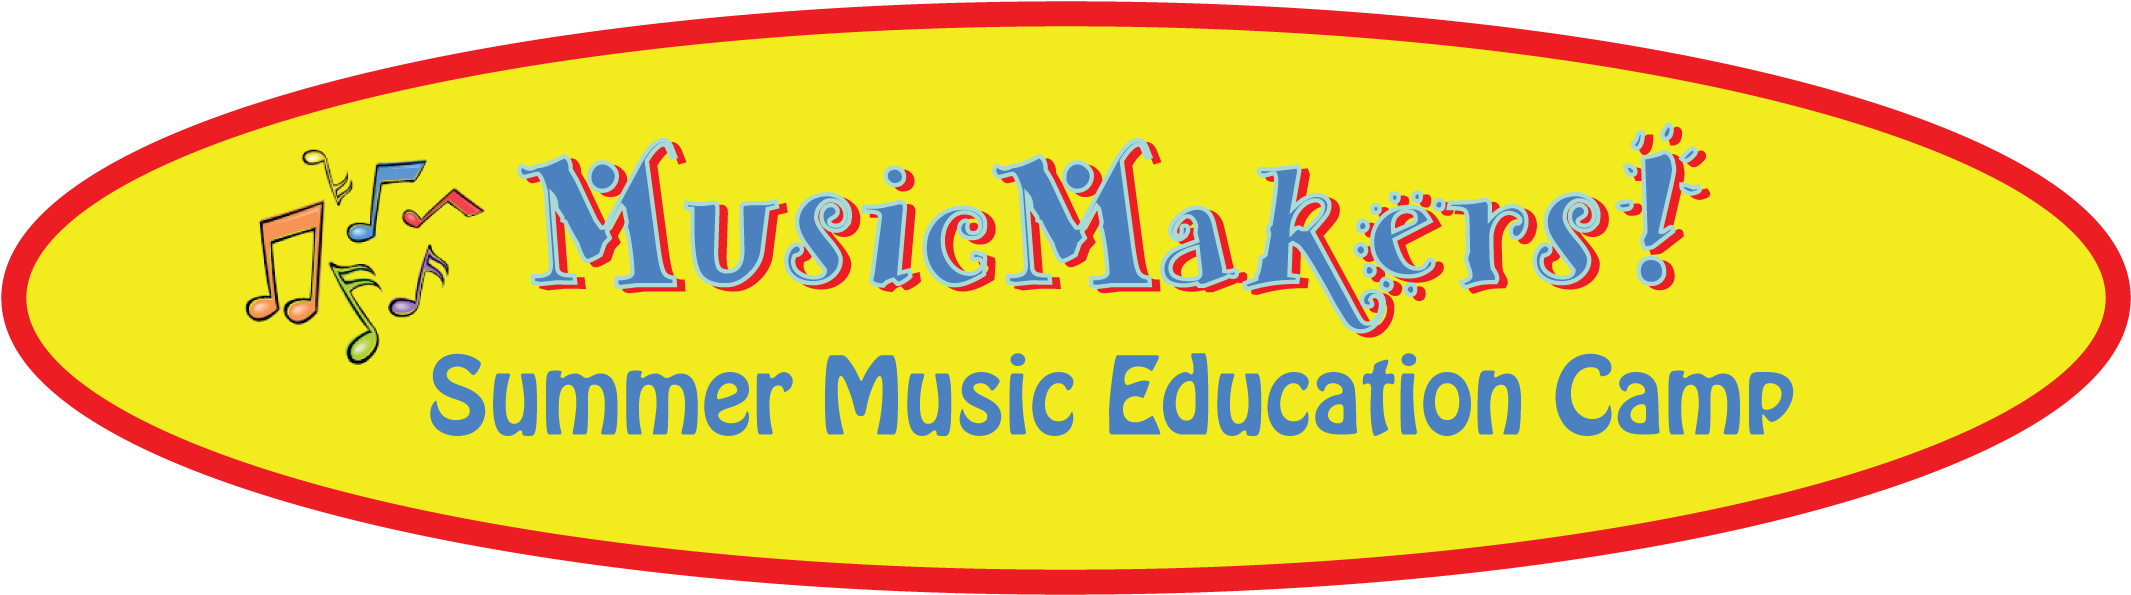 Jam With Us At Musicmakers Summer Camp - Summer Camp (2146x610)